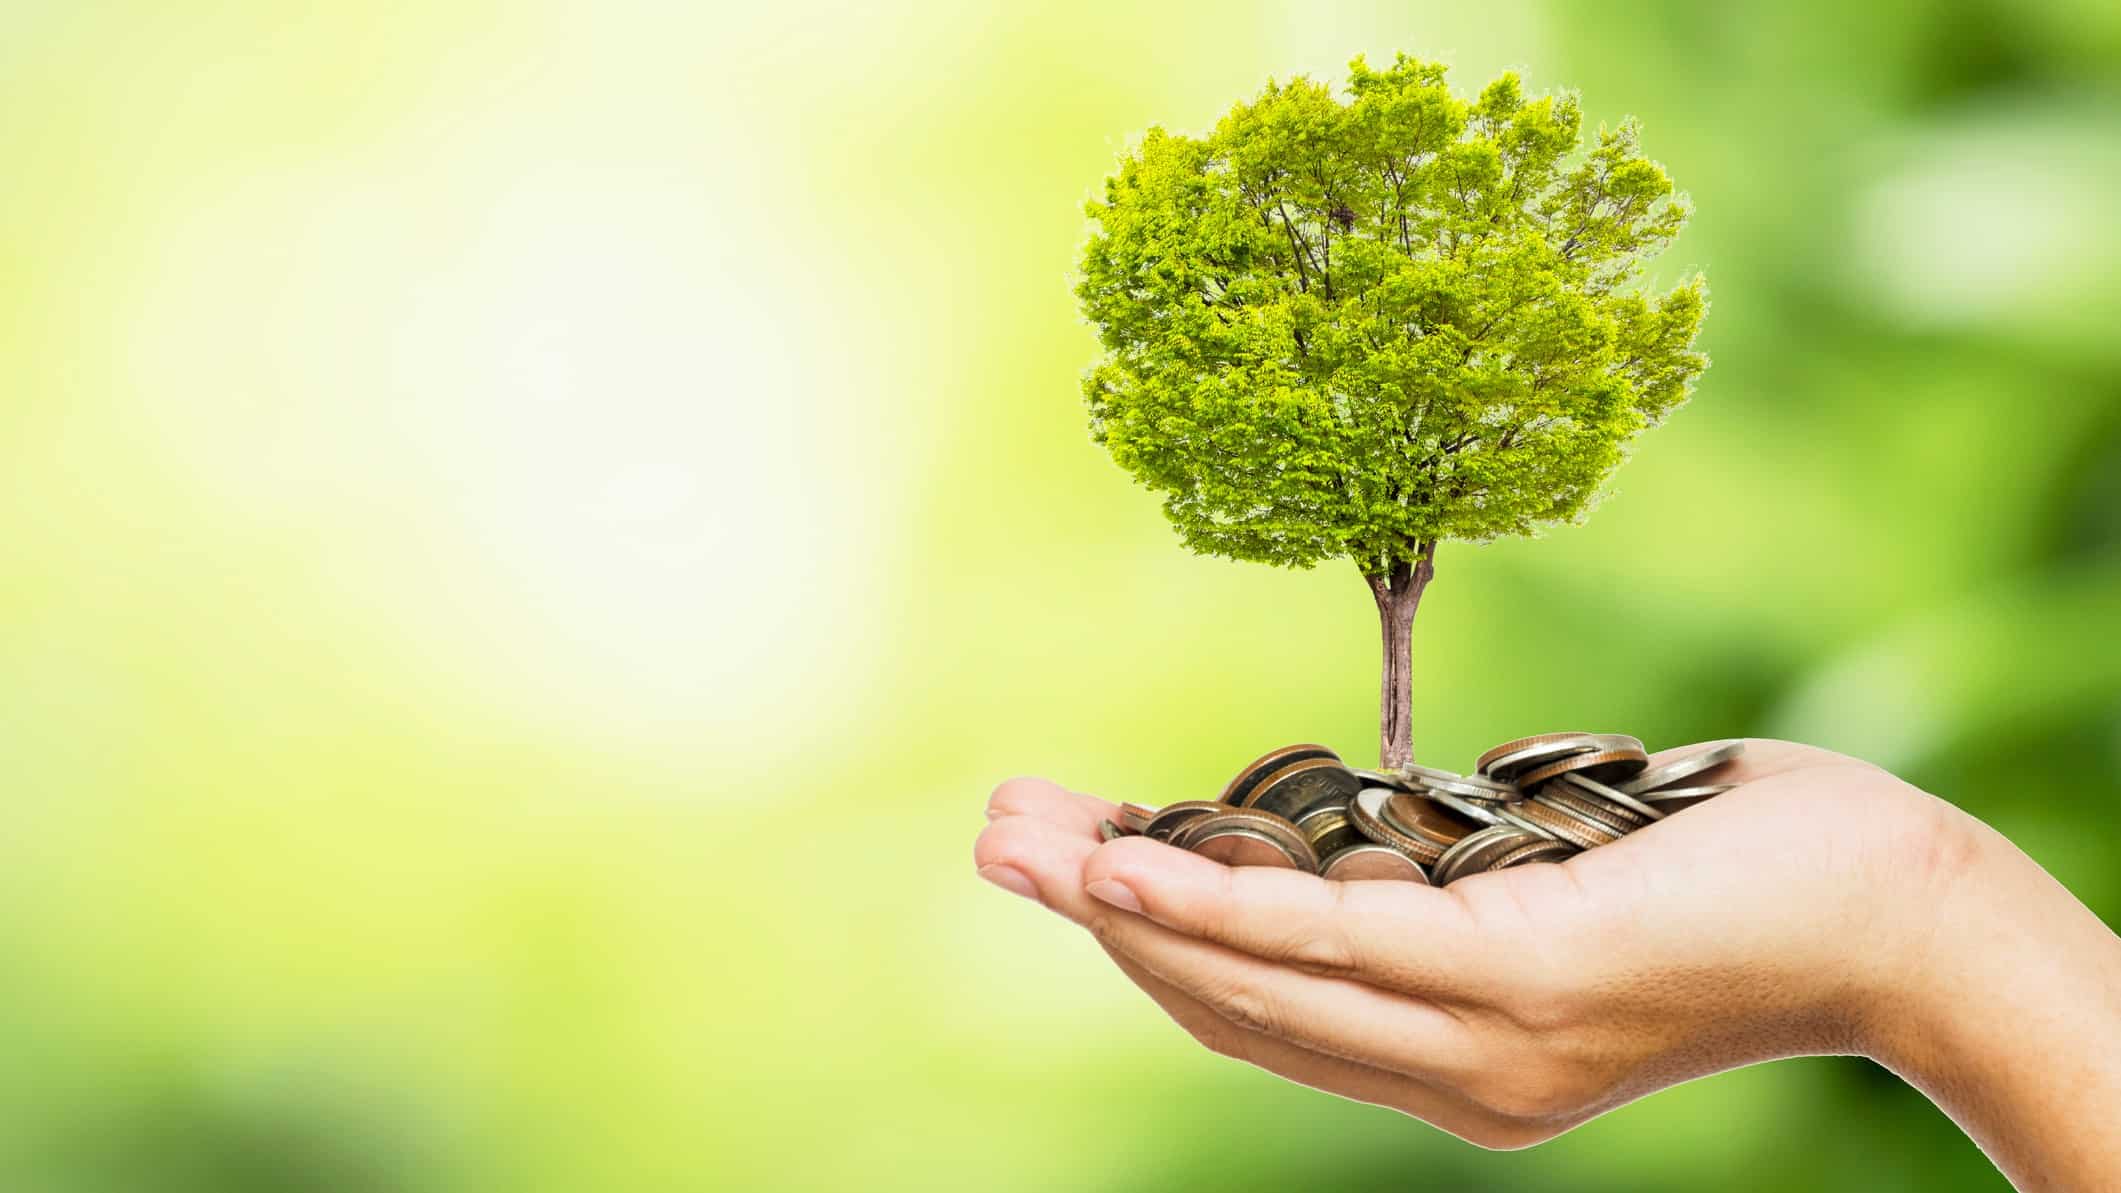 hand holding miniature tree on top of pile of coins signifying growing investment or magellan share price